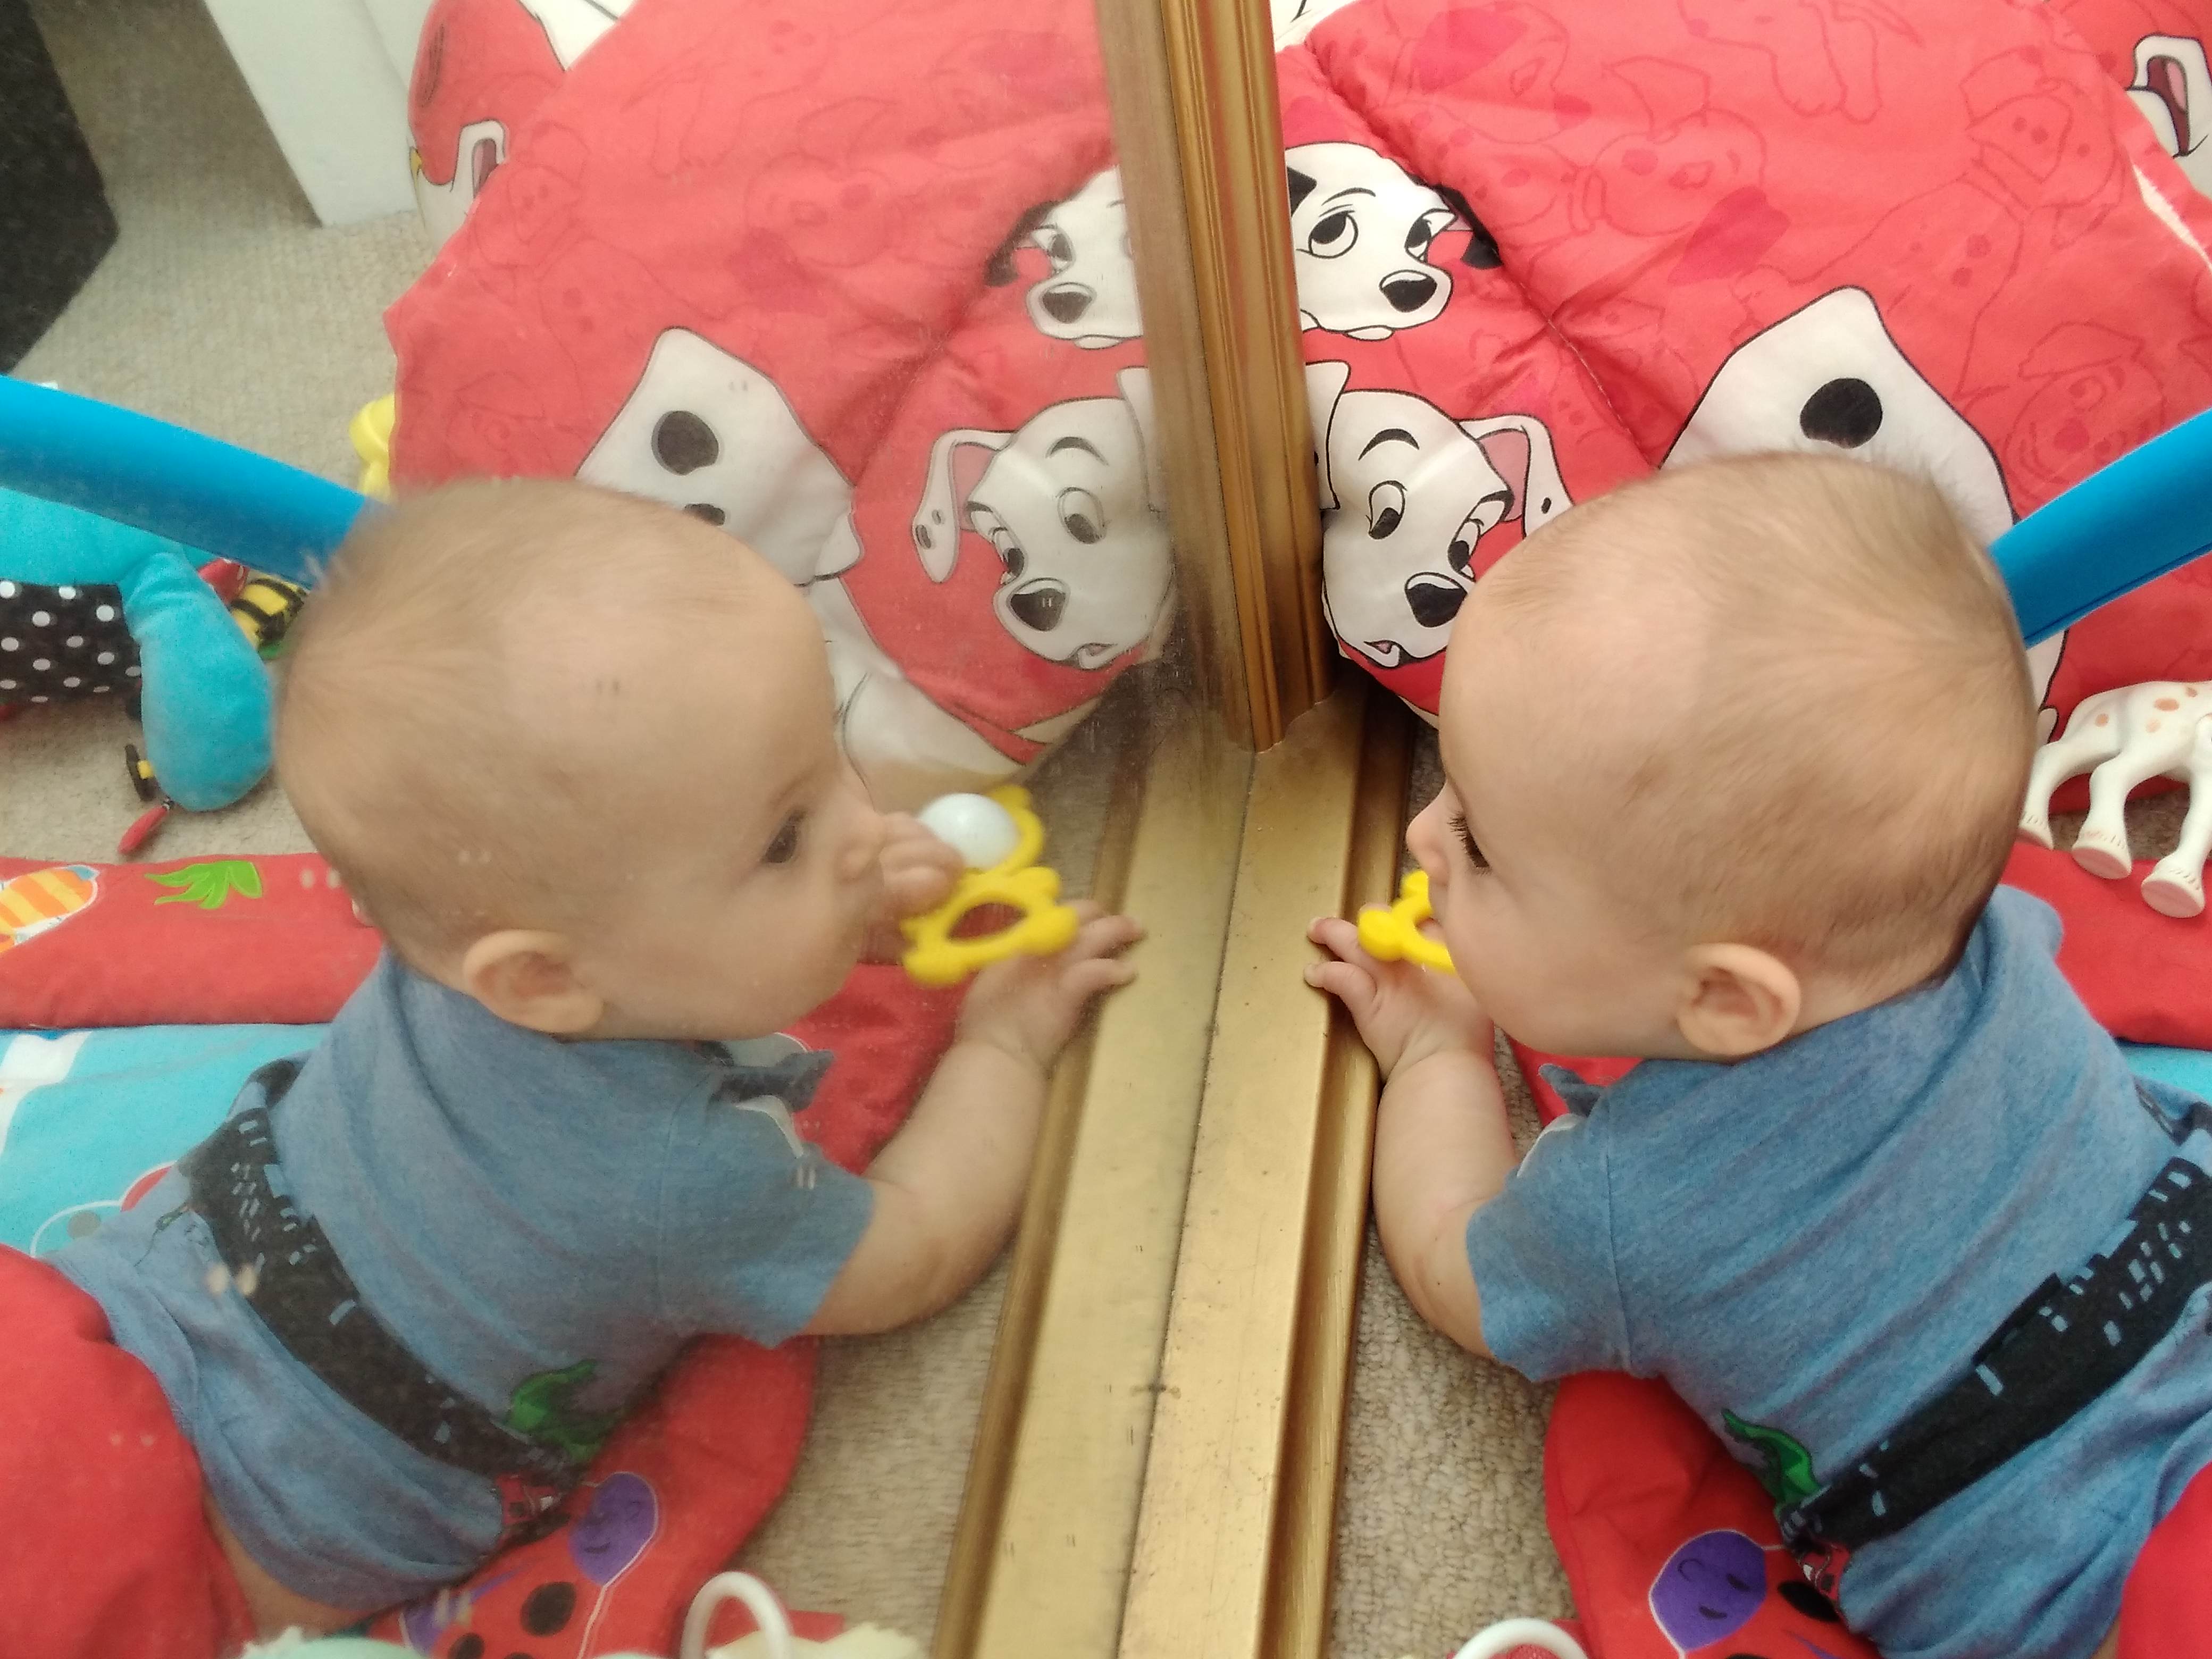 Baby looking at themselves in a mirror